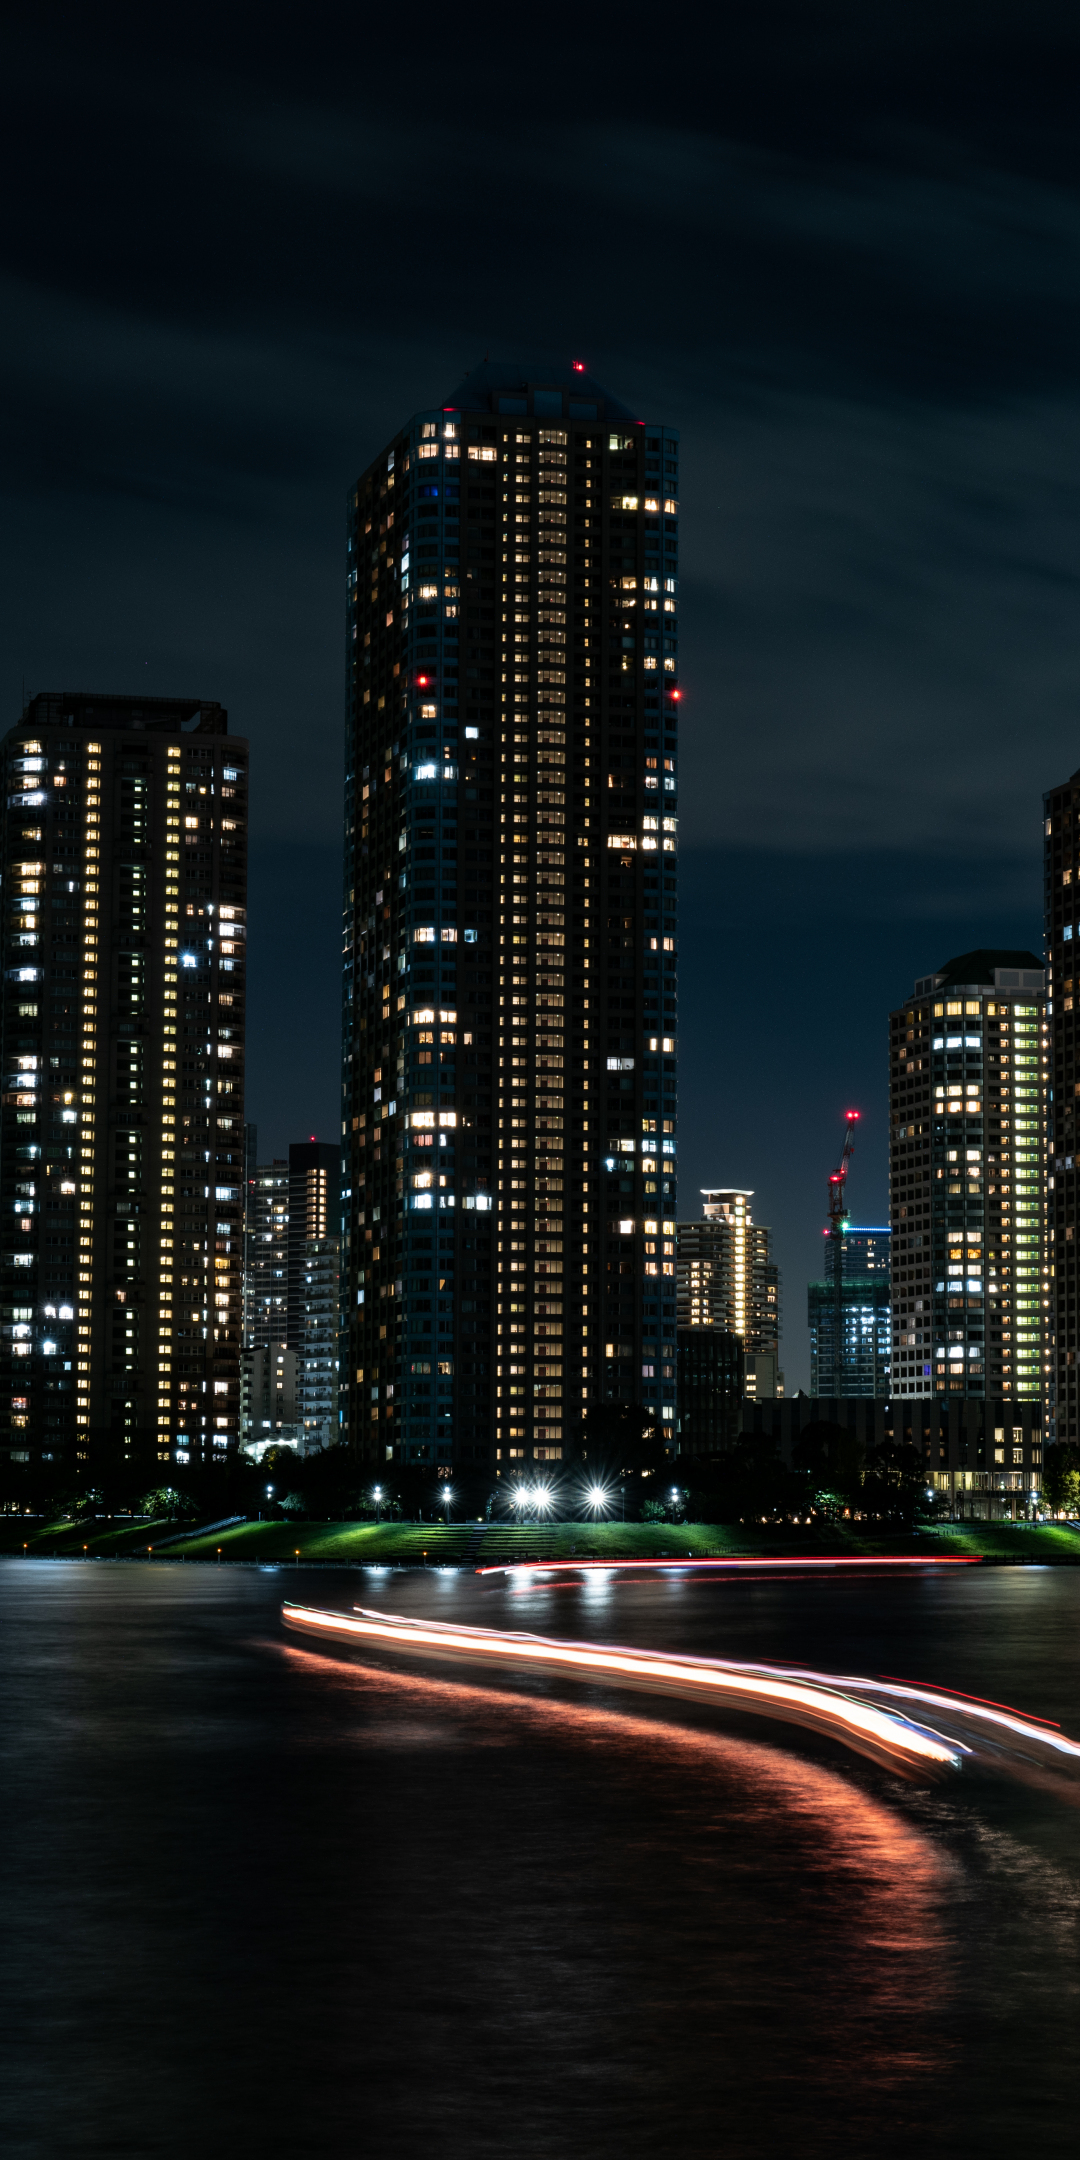 Night, city, buildings, high towers and skyscrapers, cityscape, 1080x2160 wallpaper